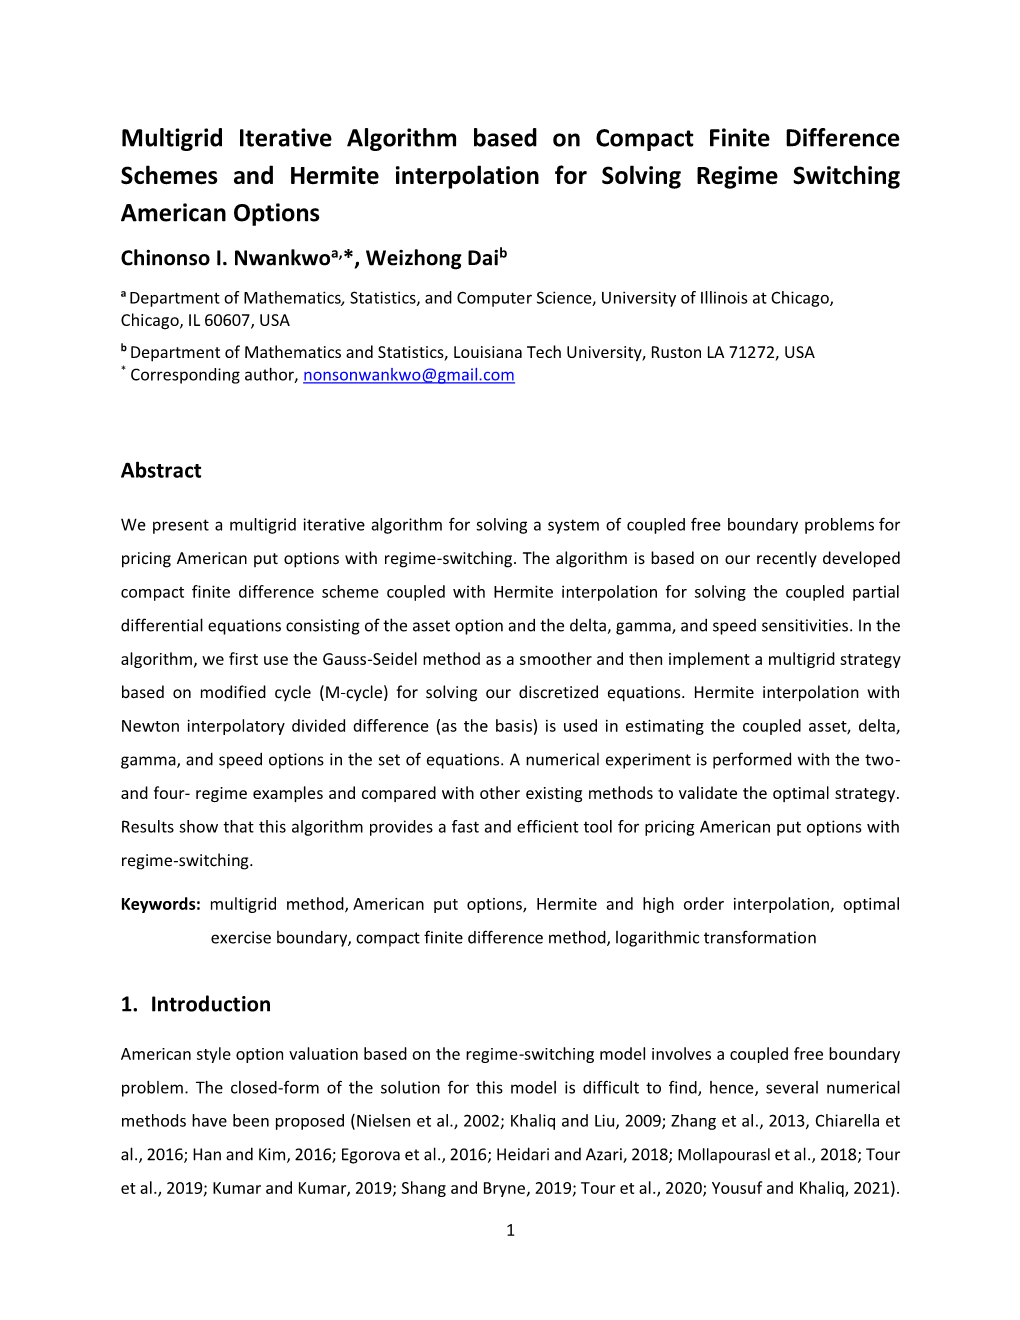 Multigrid Iterative Algorithm Based on Compact Finite Difference Schemes and Hermite Interpolation for Solving Regime Switching American Options Chinonso I